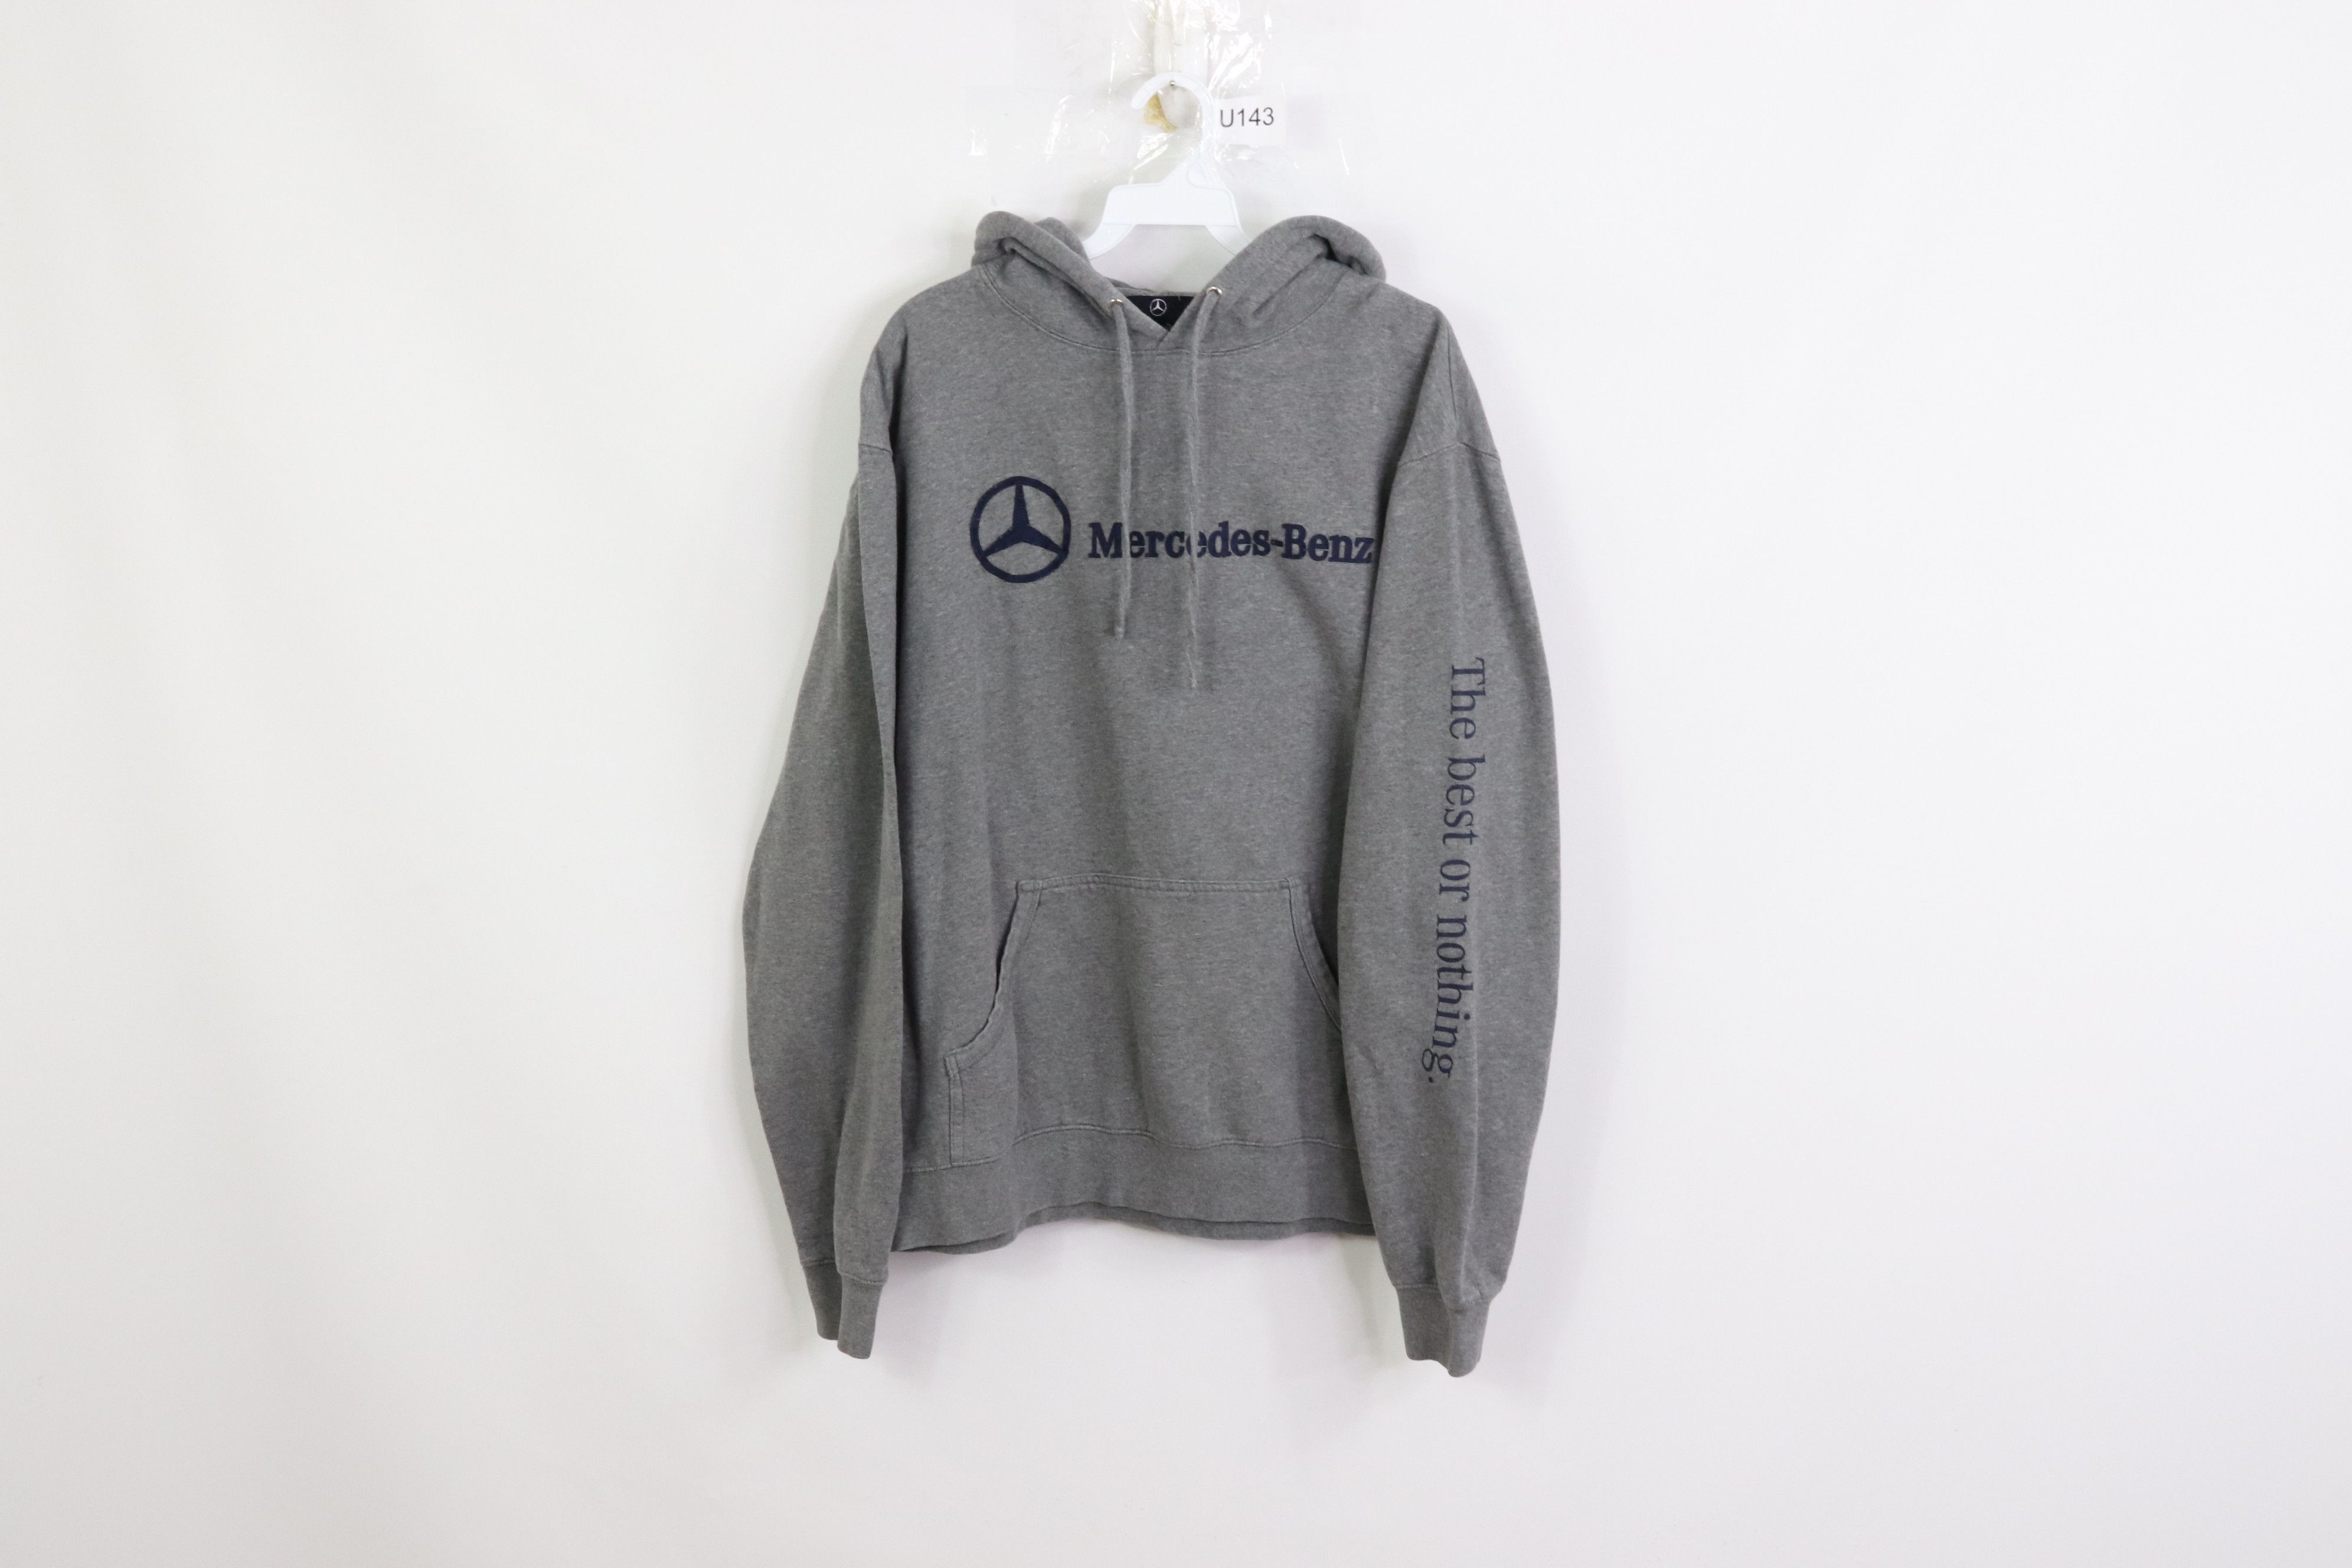 Mercedes Benz Vintage Mercedes Benz Mens XL The Best or Nothing Spell Out Hoodie Sweatshirt Size US XL / EU 56 / 4 - 1 Preview